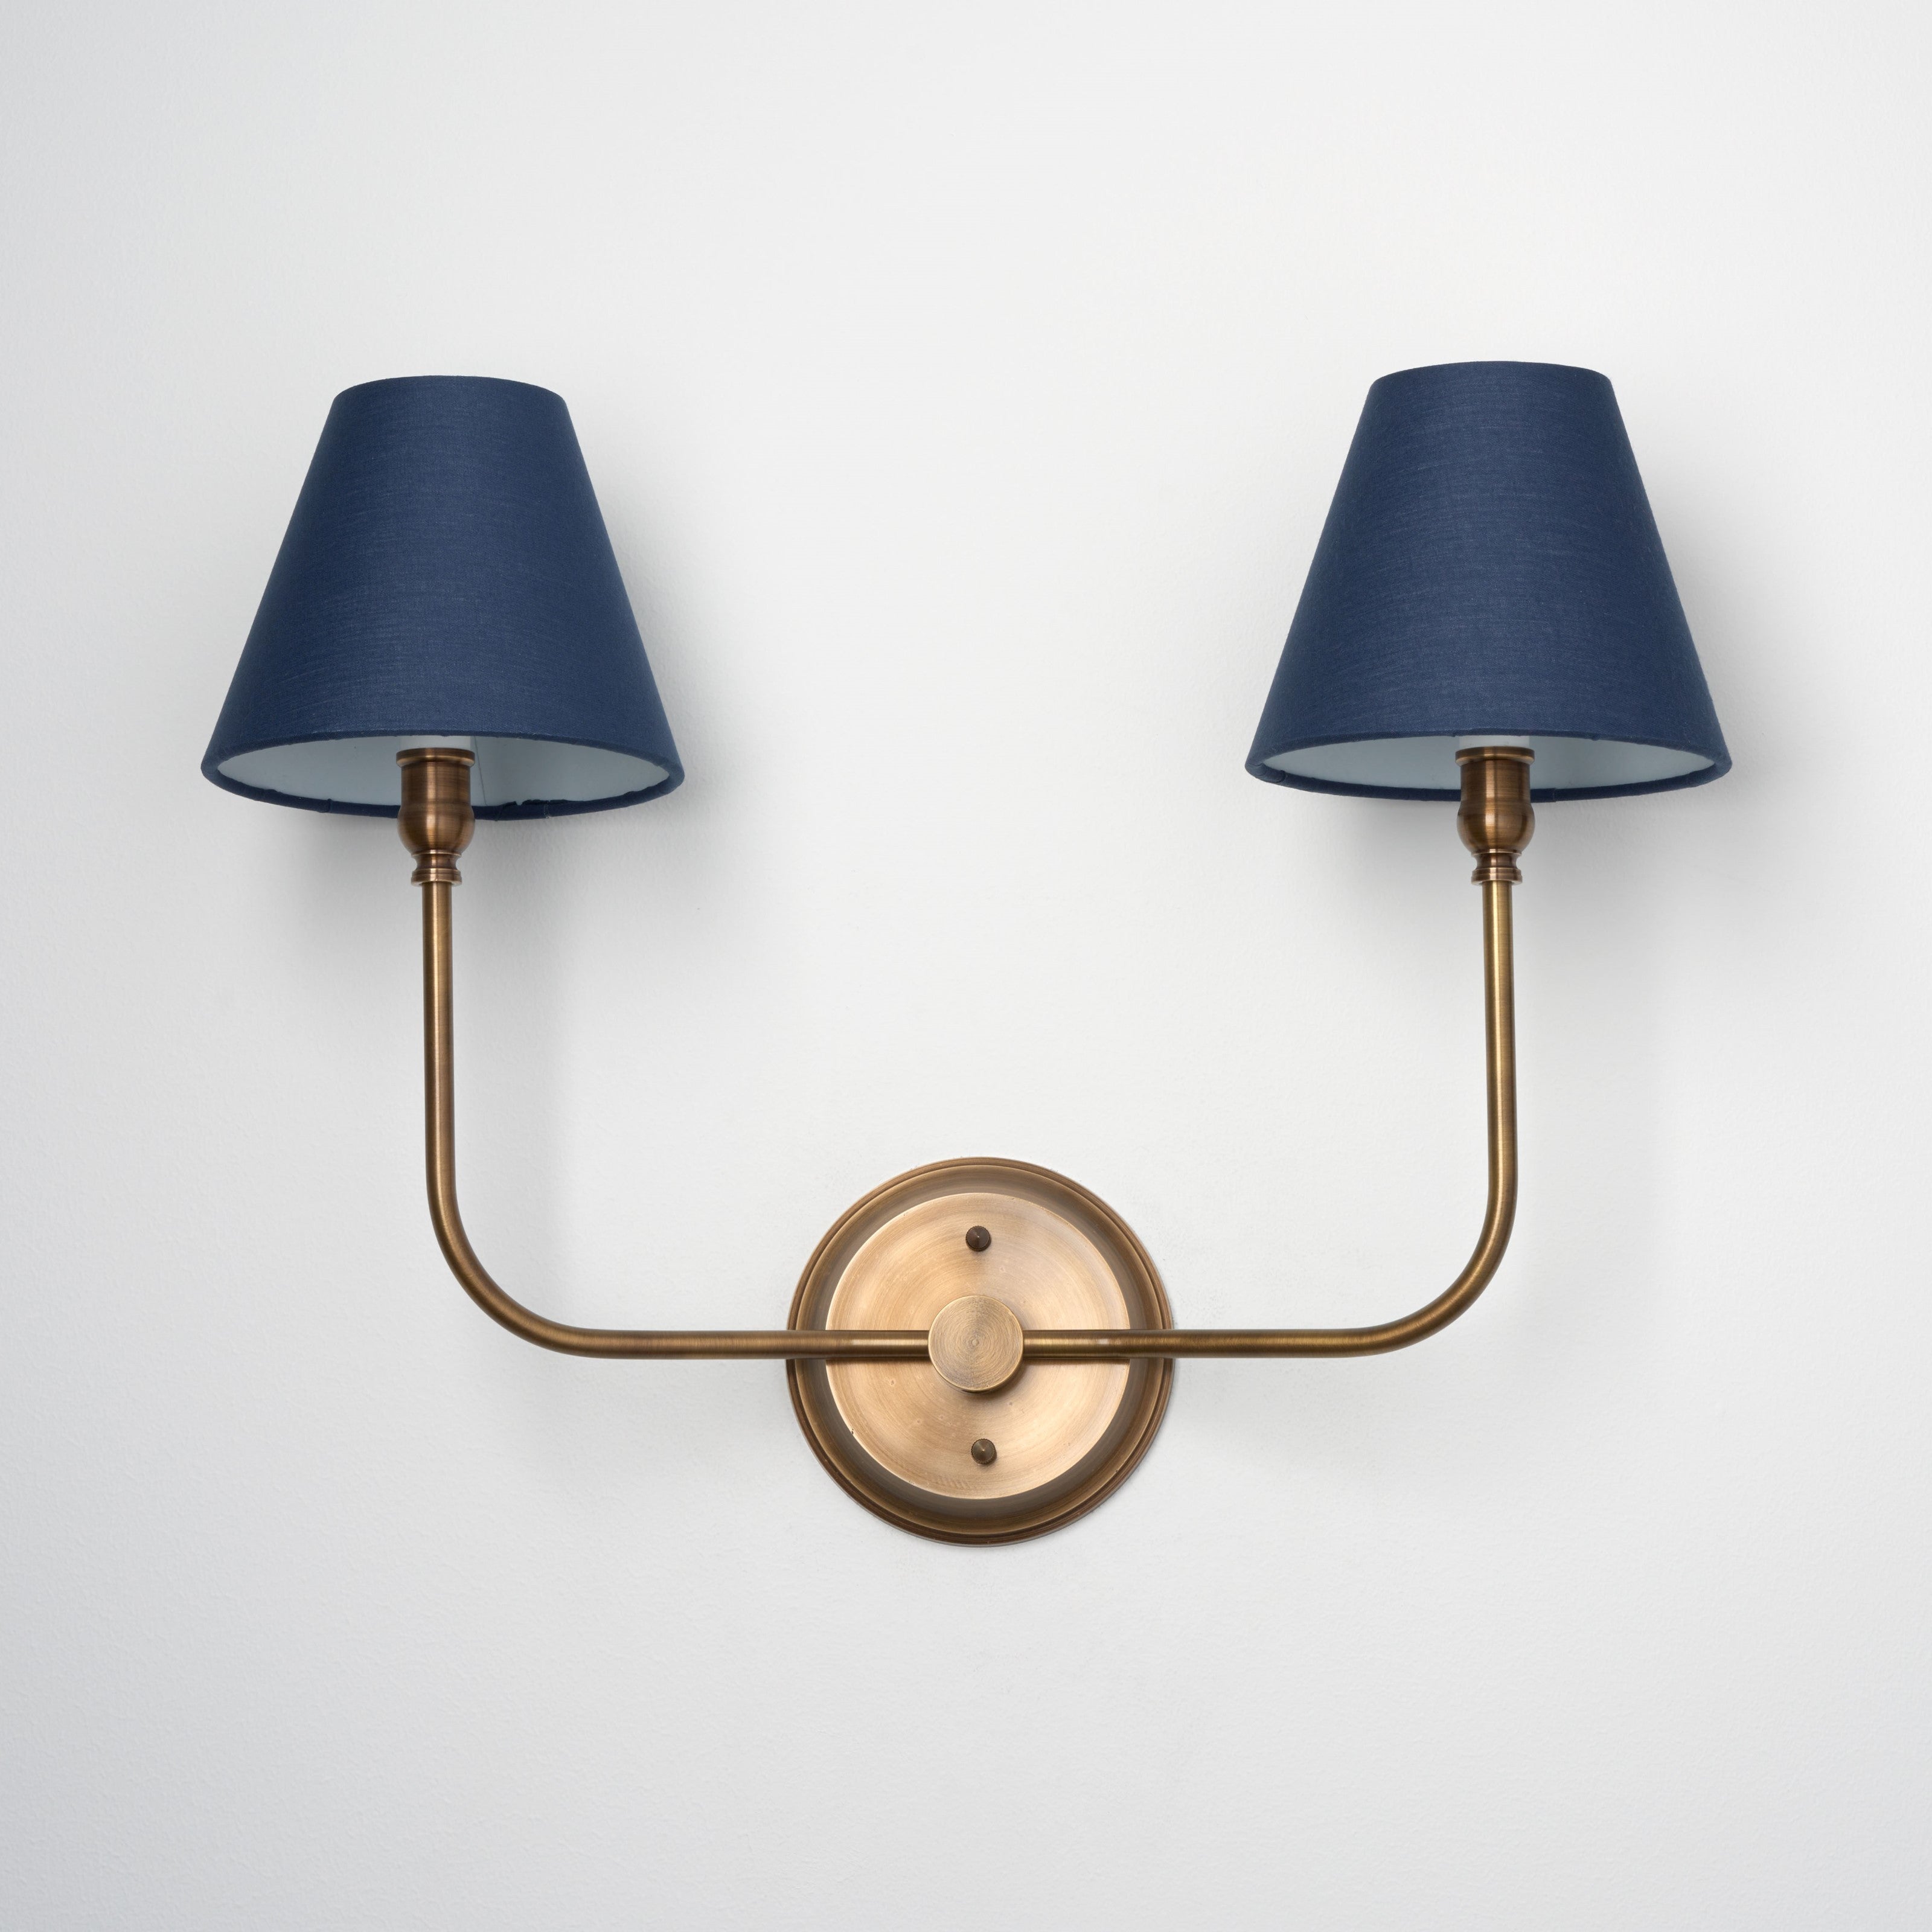 Shortened Ridley | 2 Shade J-Curve Sconce